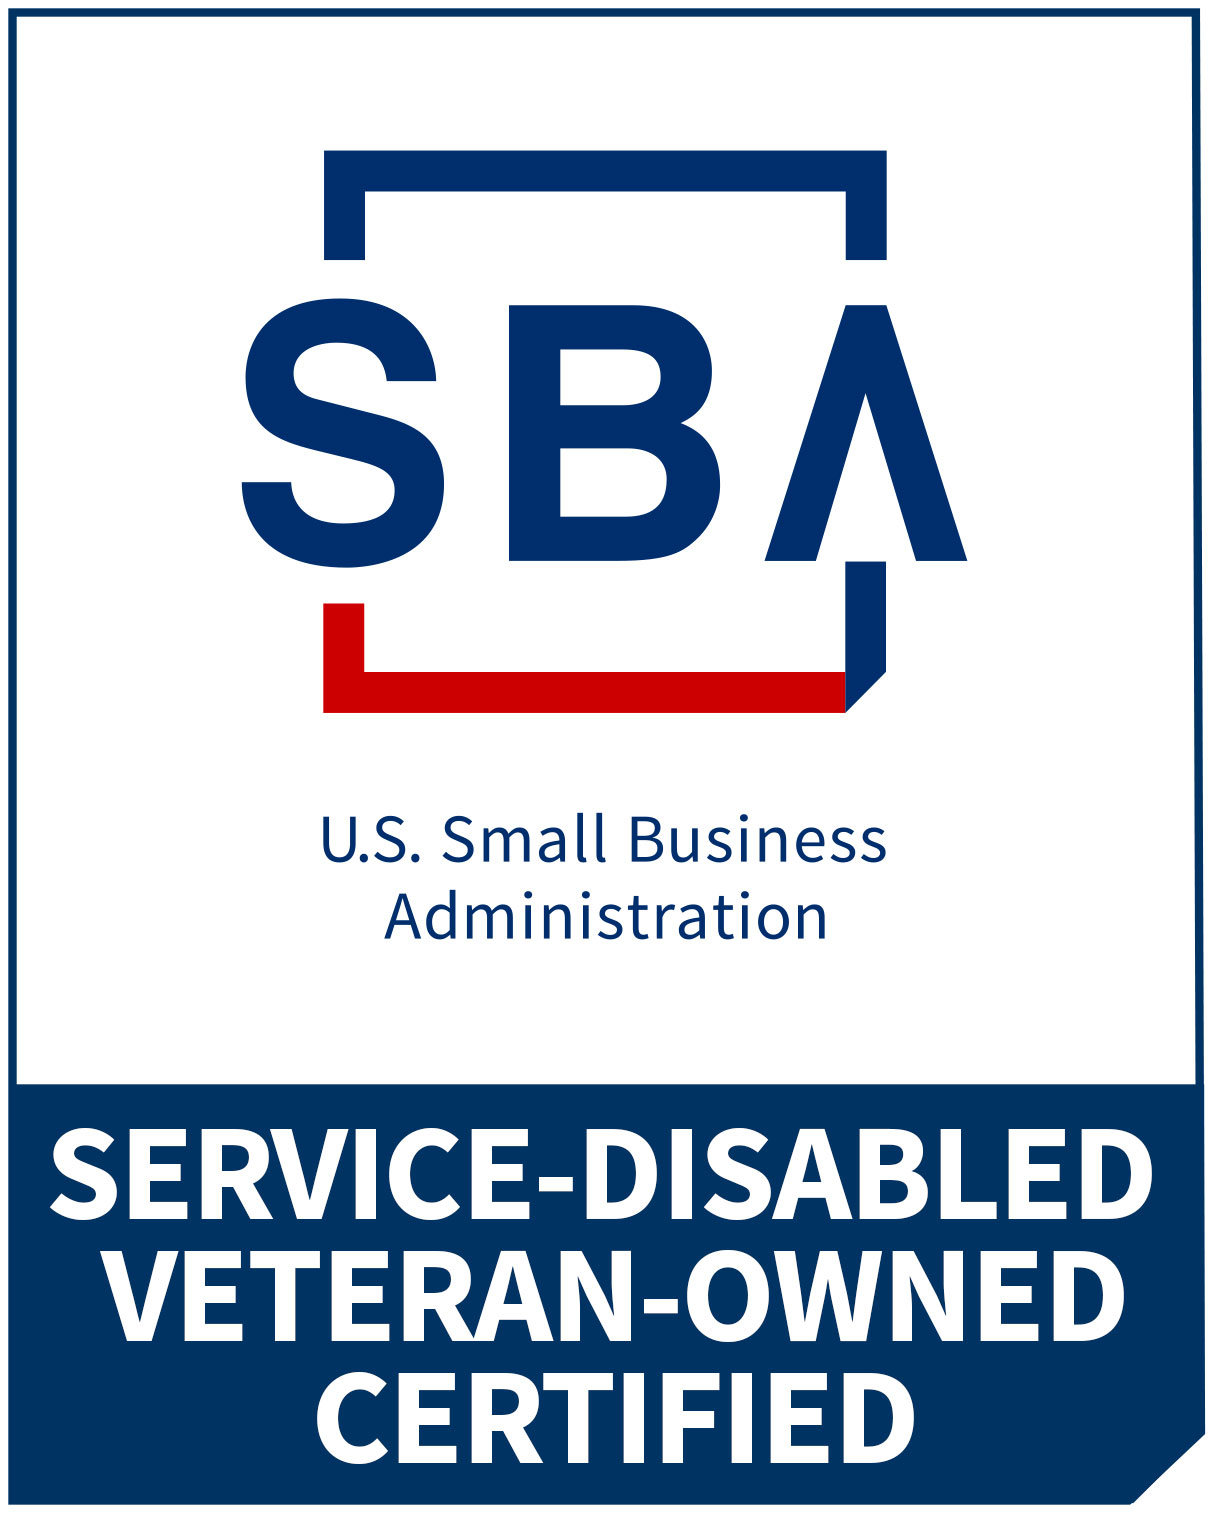 Art of Frozen Time is a SBA-certified Service-Disabled Veteran-Owned Small Business (SDVOSB)